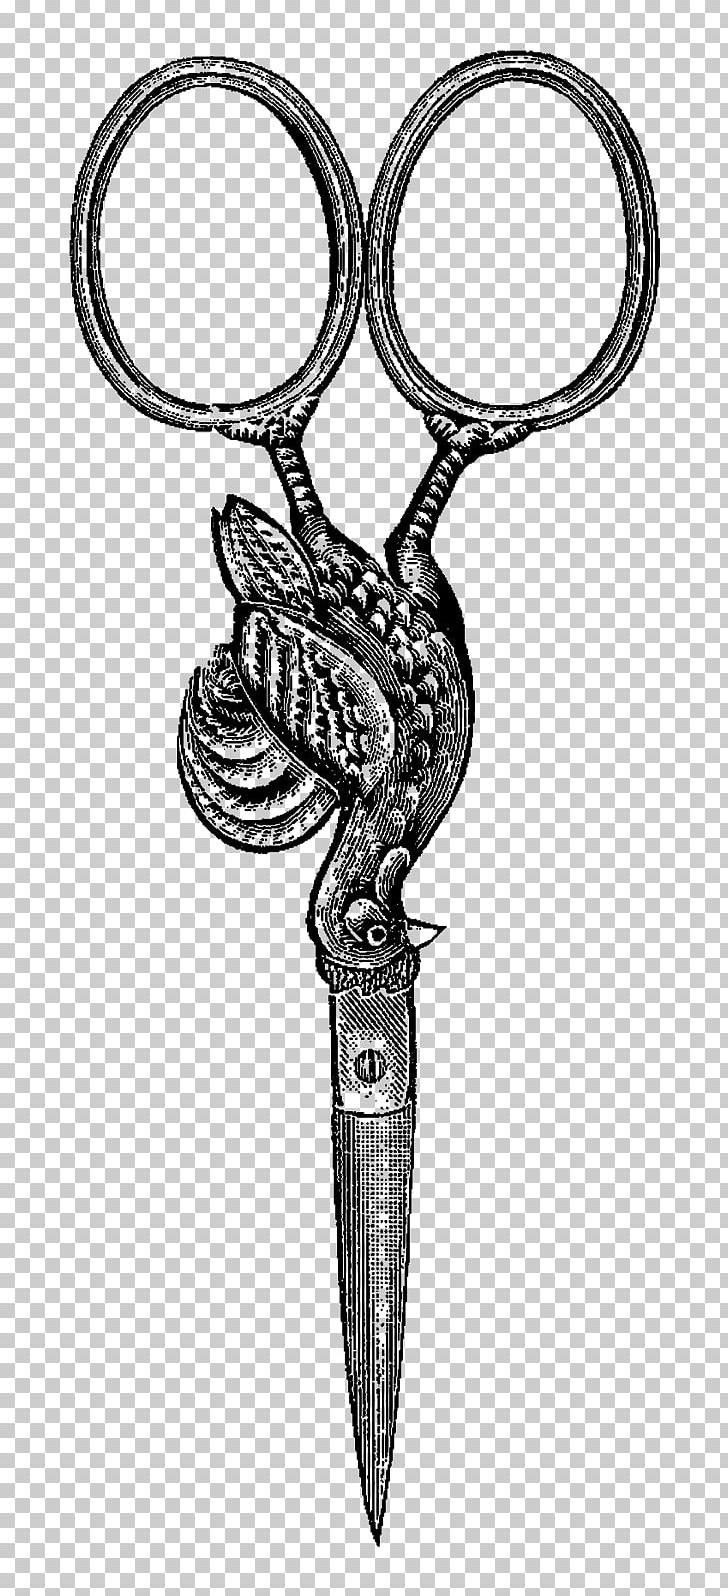 Scissors Illustration Drawing Sewing Design PNG, Clipart, Black, Black And White, Body Jewelry, Digital Illustration, Drawing Free PNG Download